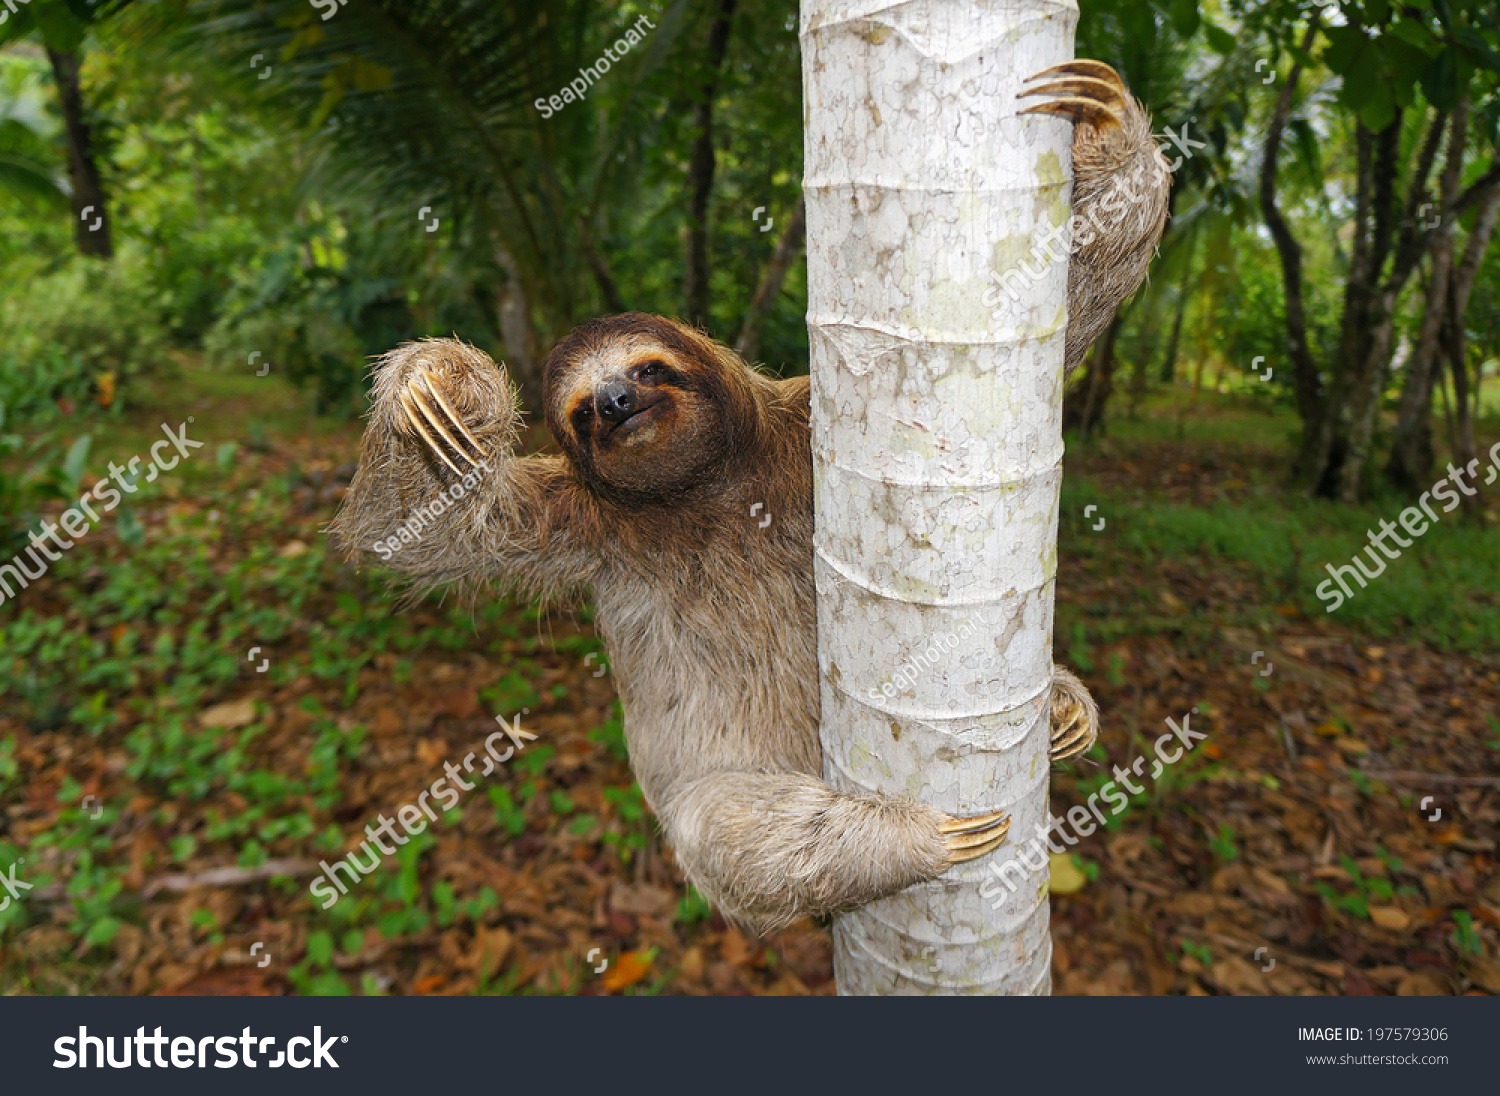 Brown-throated sloth climbs on a tree, Panama, Central America #197579306